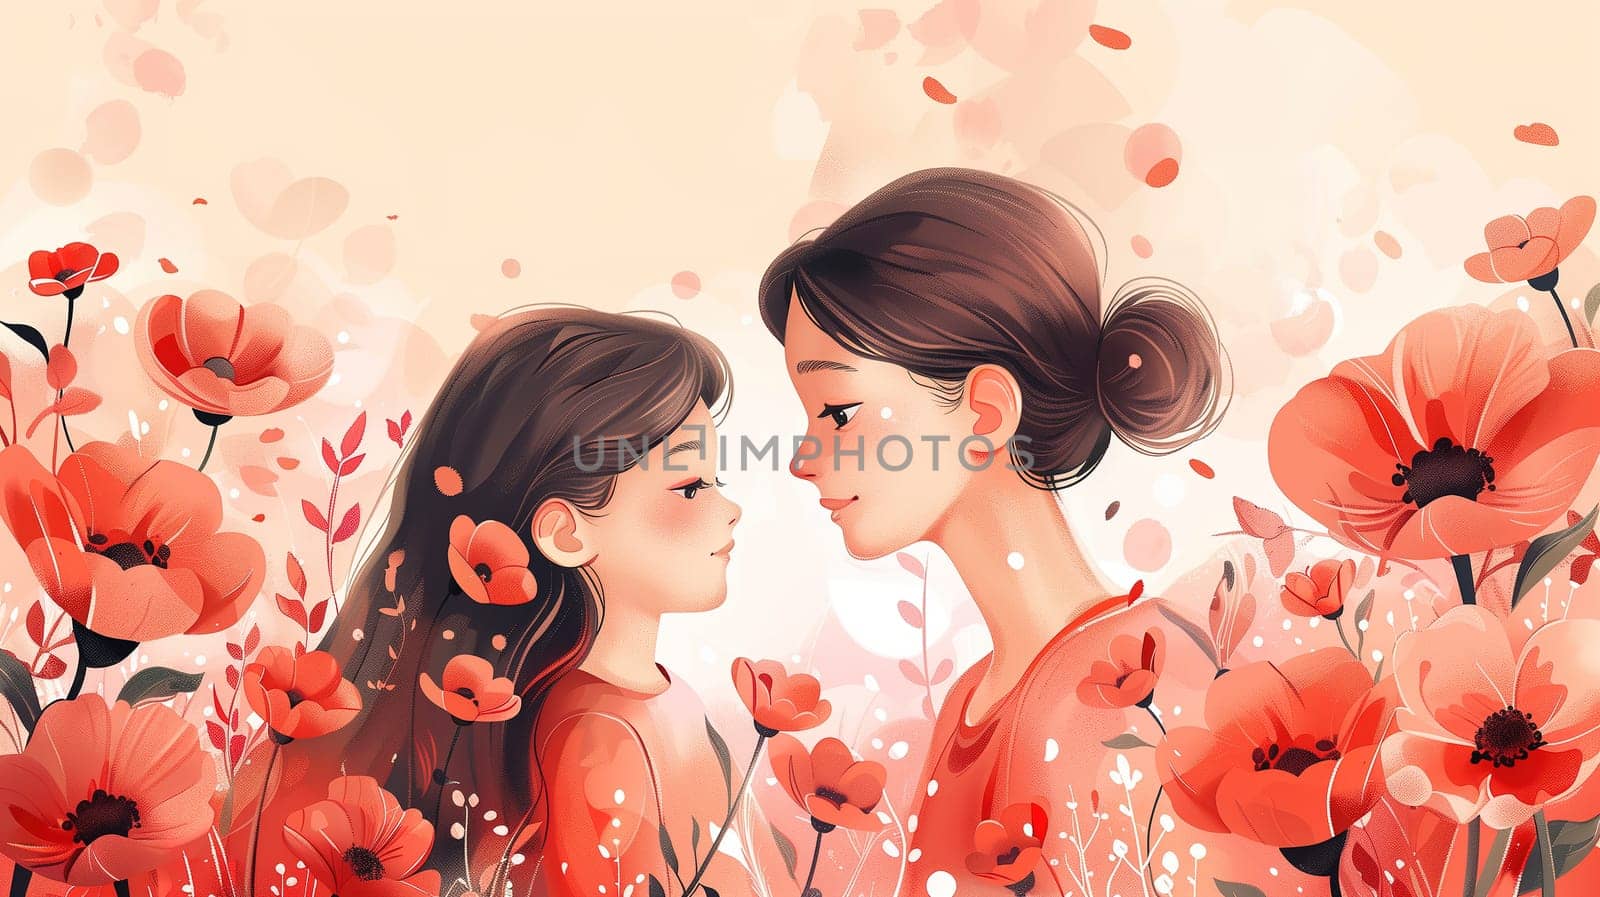 Two young girls are standing amidst a field of vibrant red flowers. They are gazing at the surroundings, enjoying the beauty of the blooming flowers.